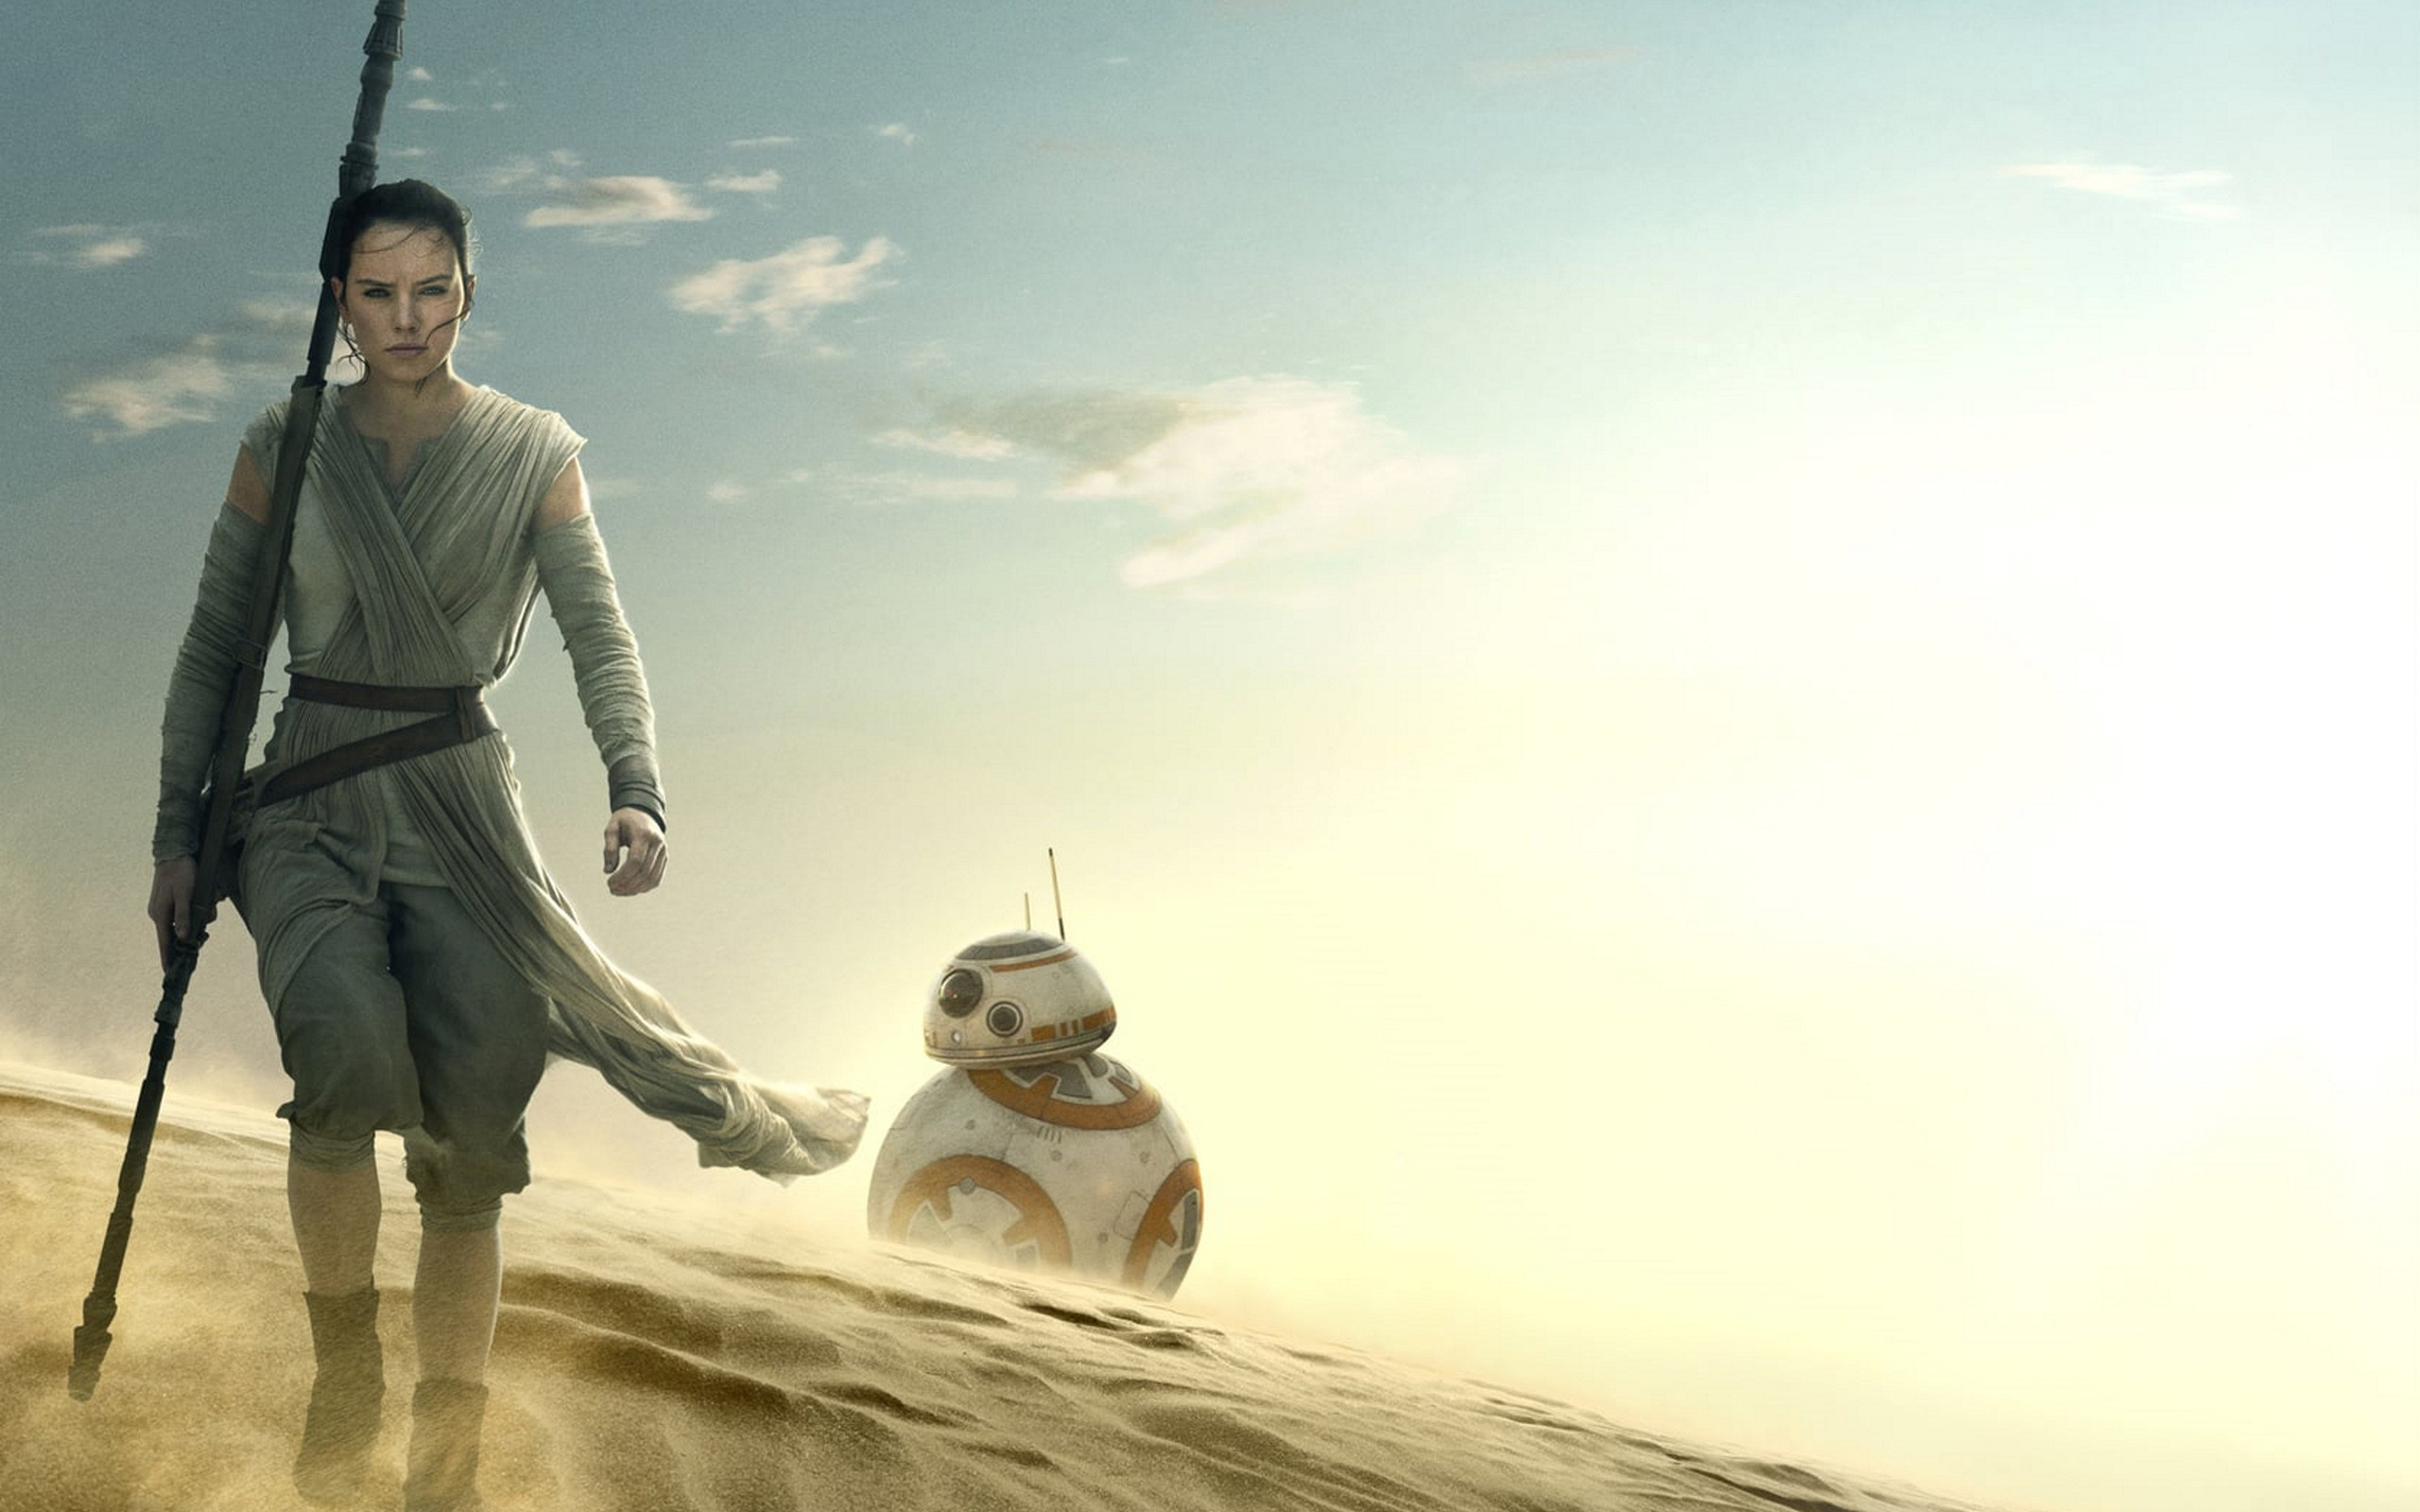 2560x1600 Star Wars: The Force Awakens Wallpapers